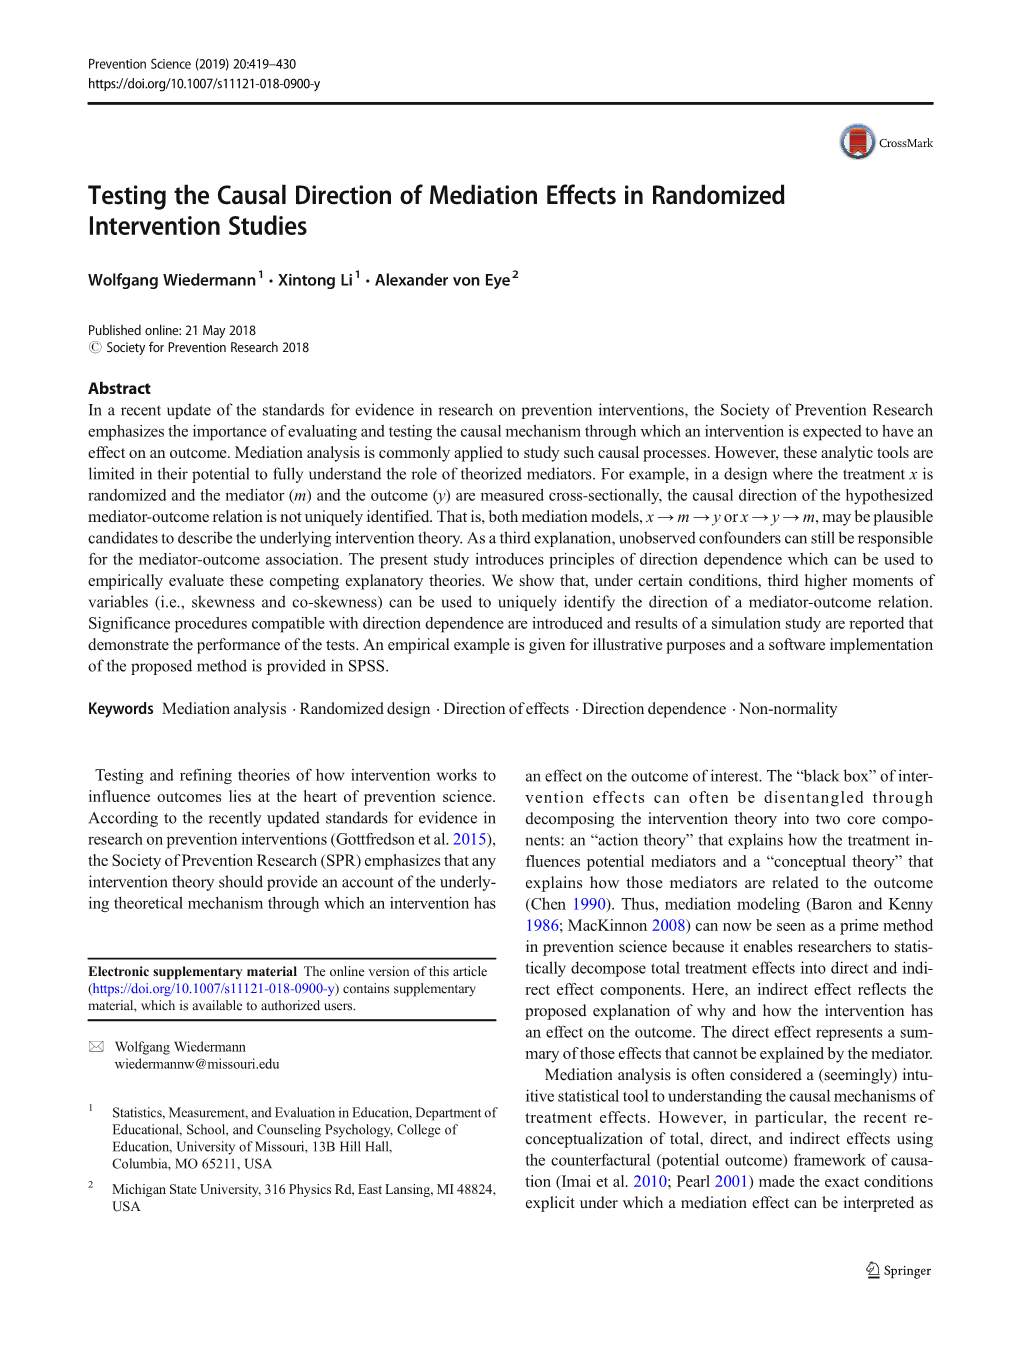 Testing the Causal Direction of Mediation Effects in Randomized Intervention Studies